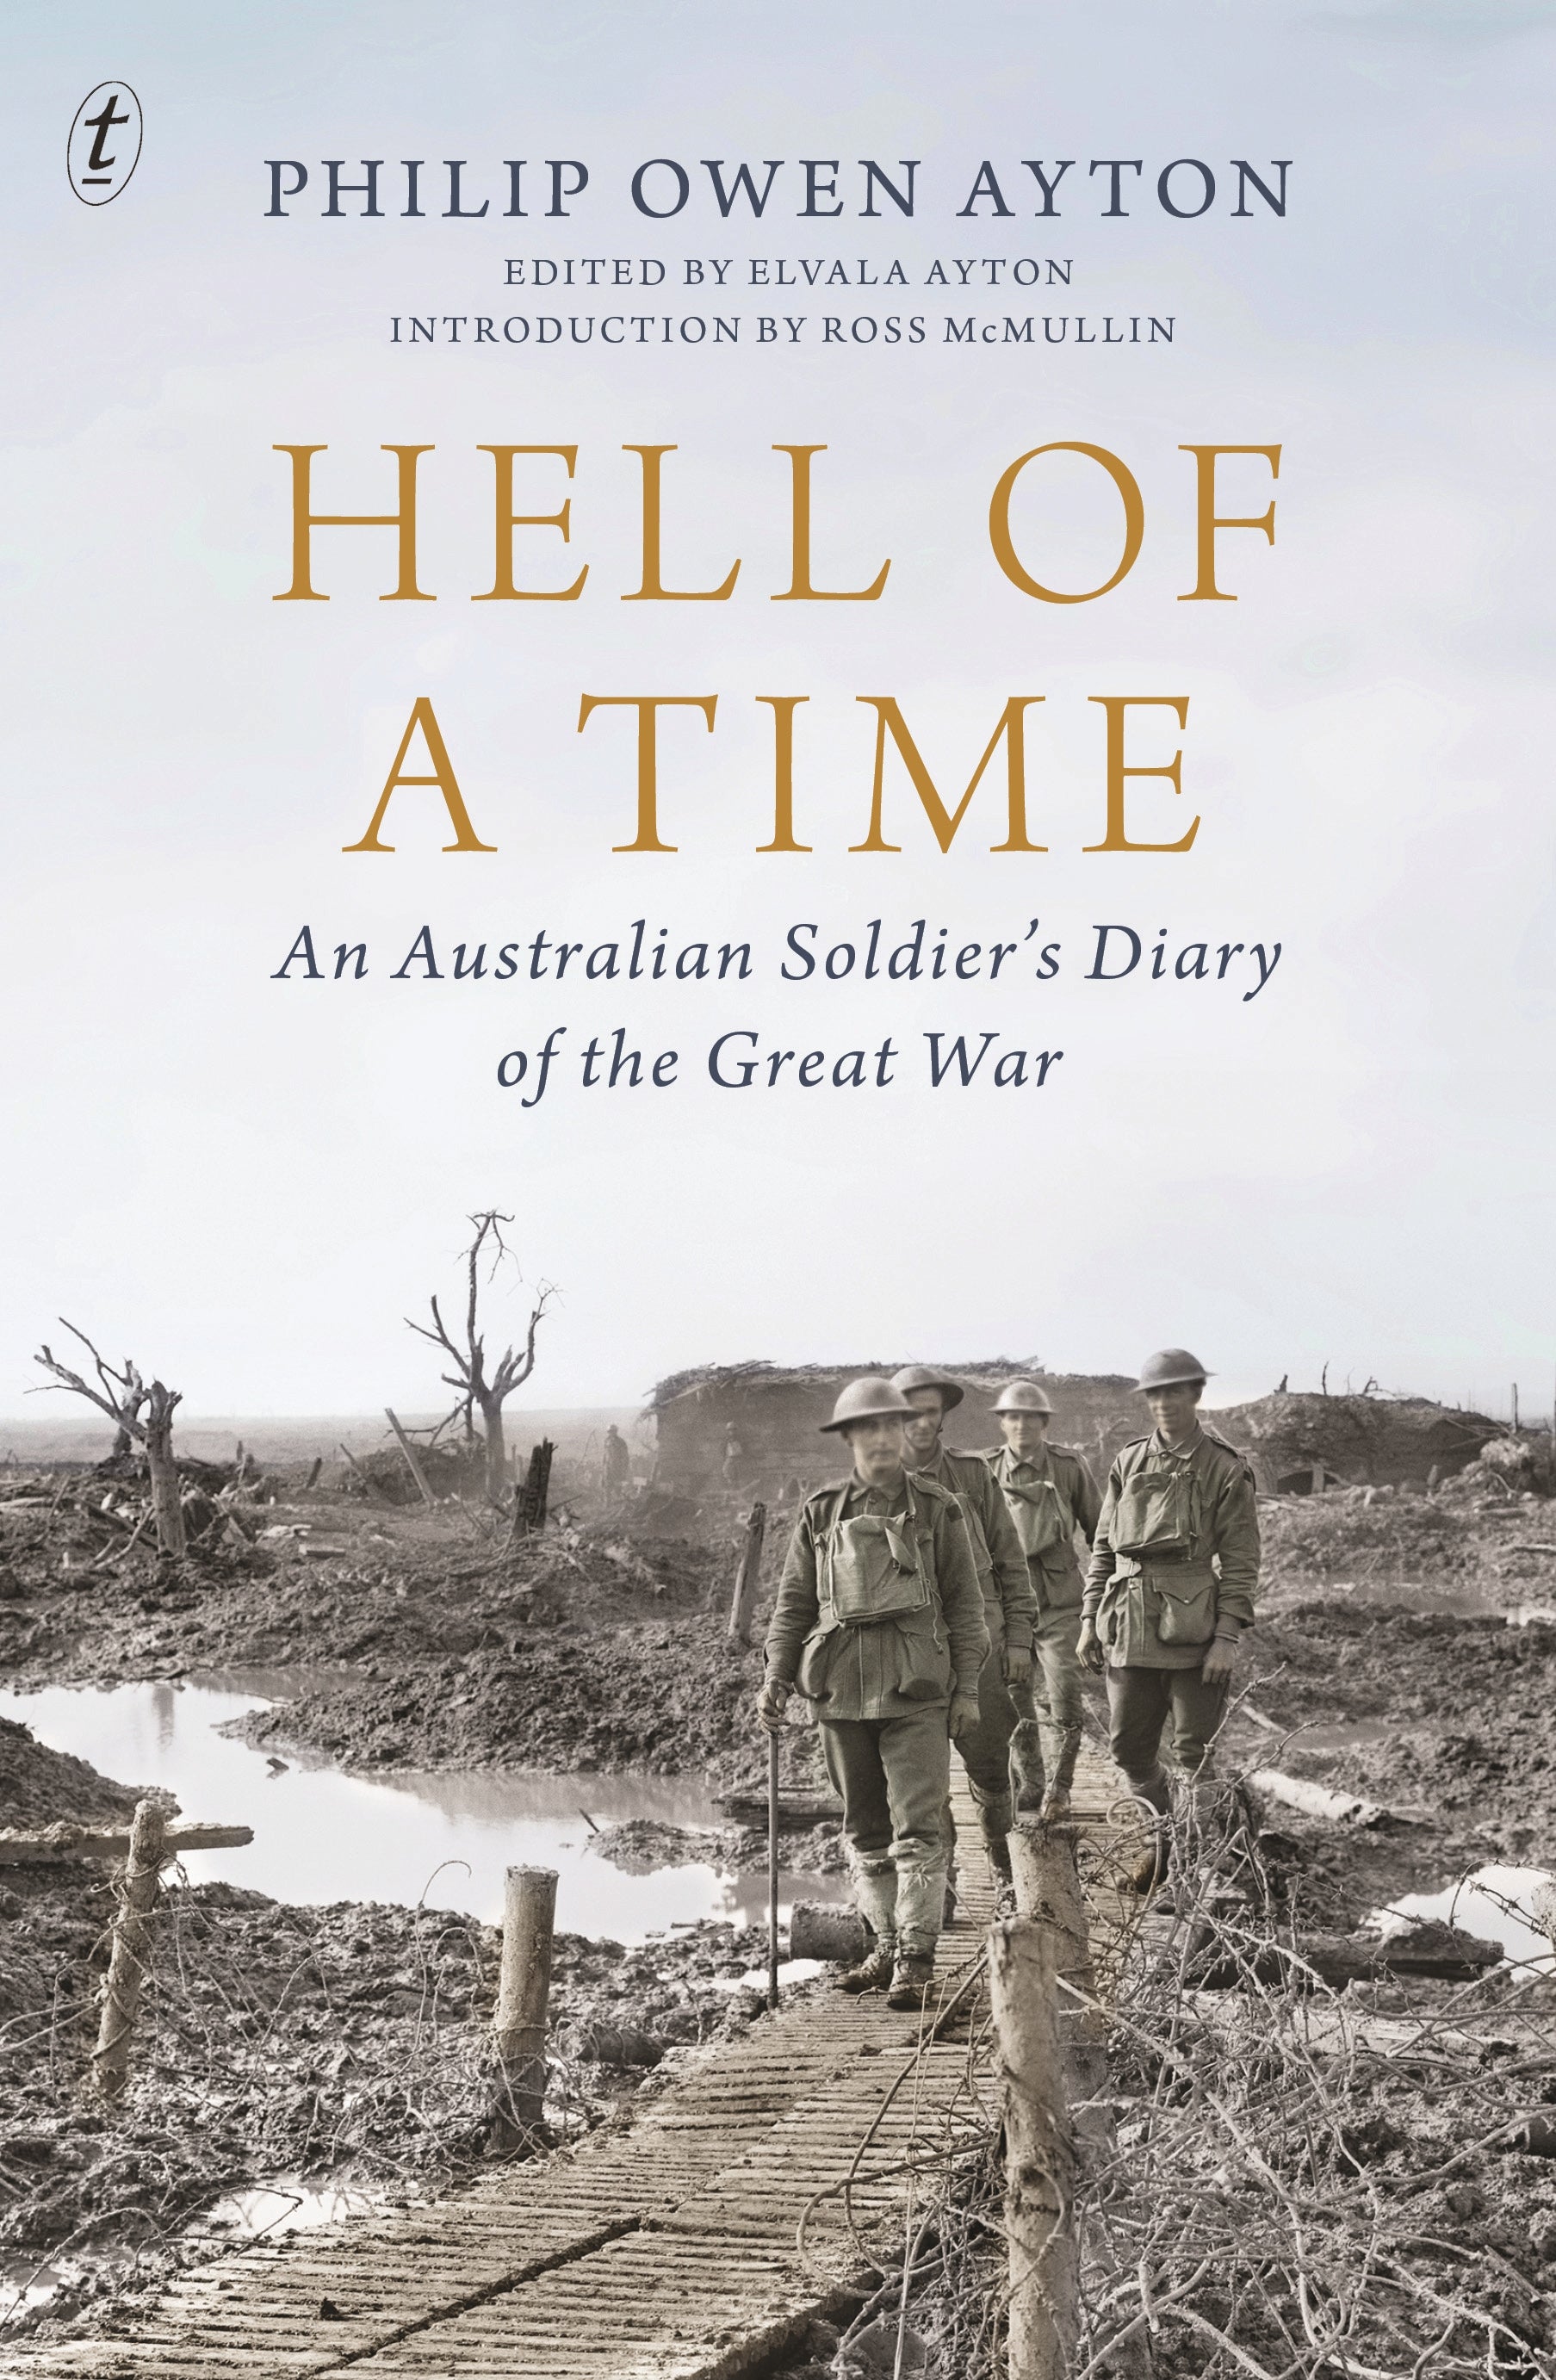 Hell of a Time: An Australian Soldier’s Diary of the Great War